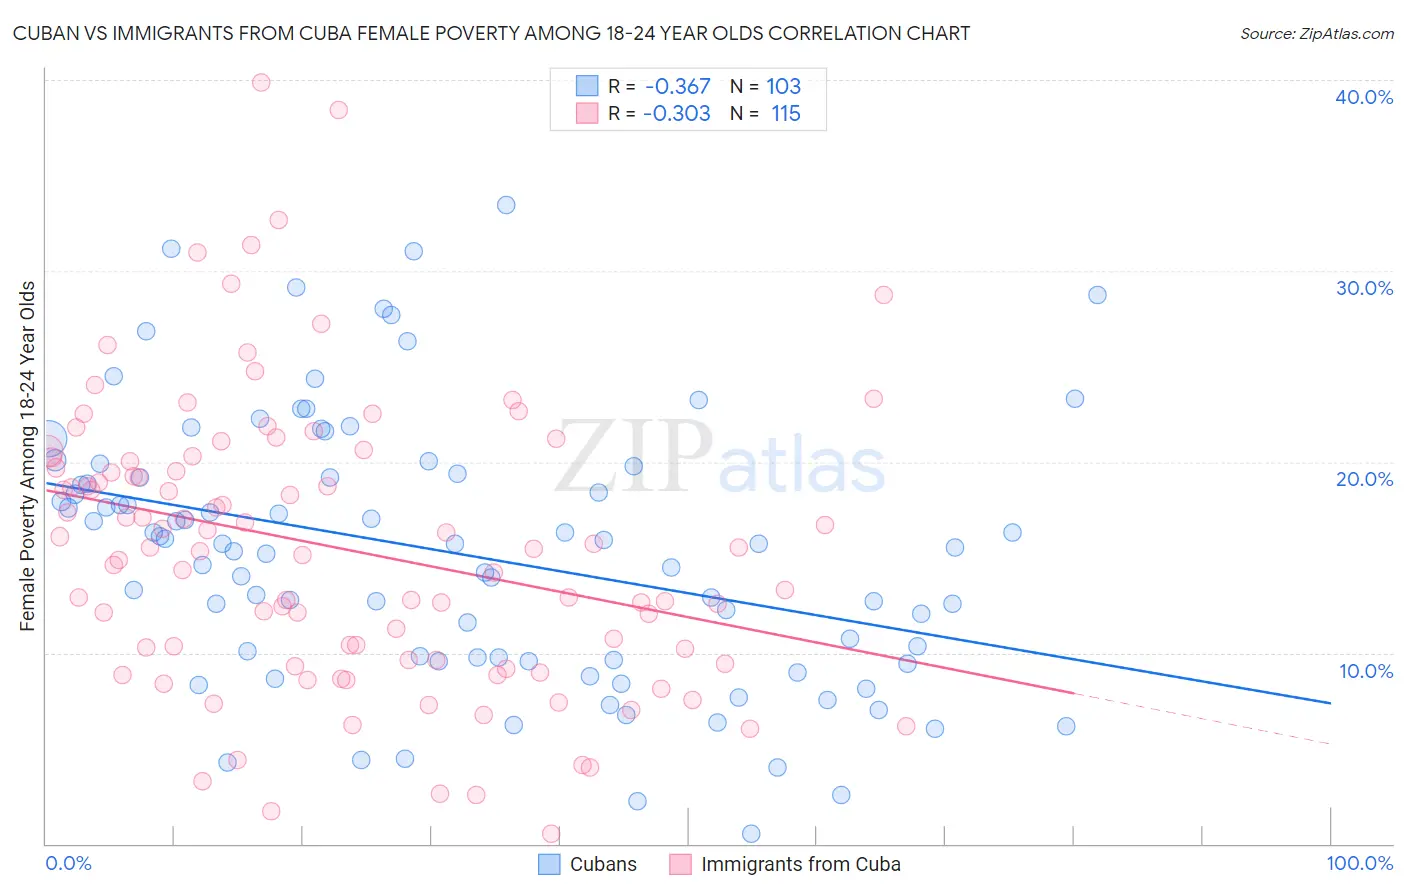 Cuban vs Immigrants from Cuba Female Poverty Among 18-24 Year Olds